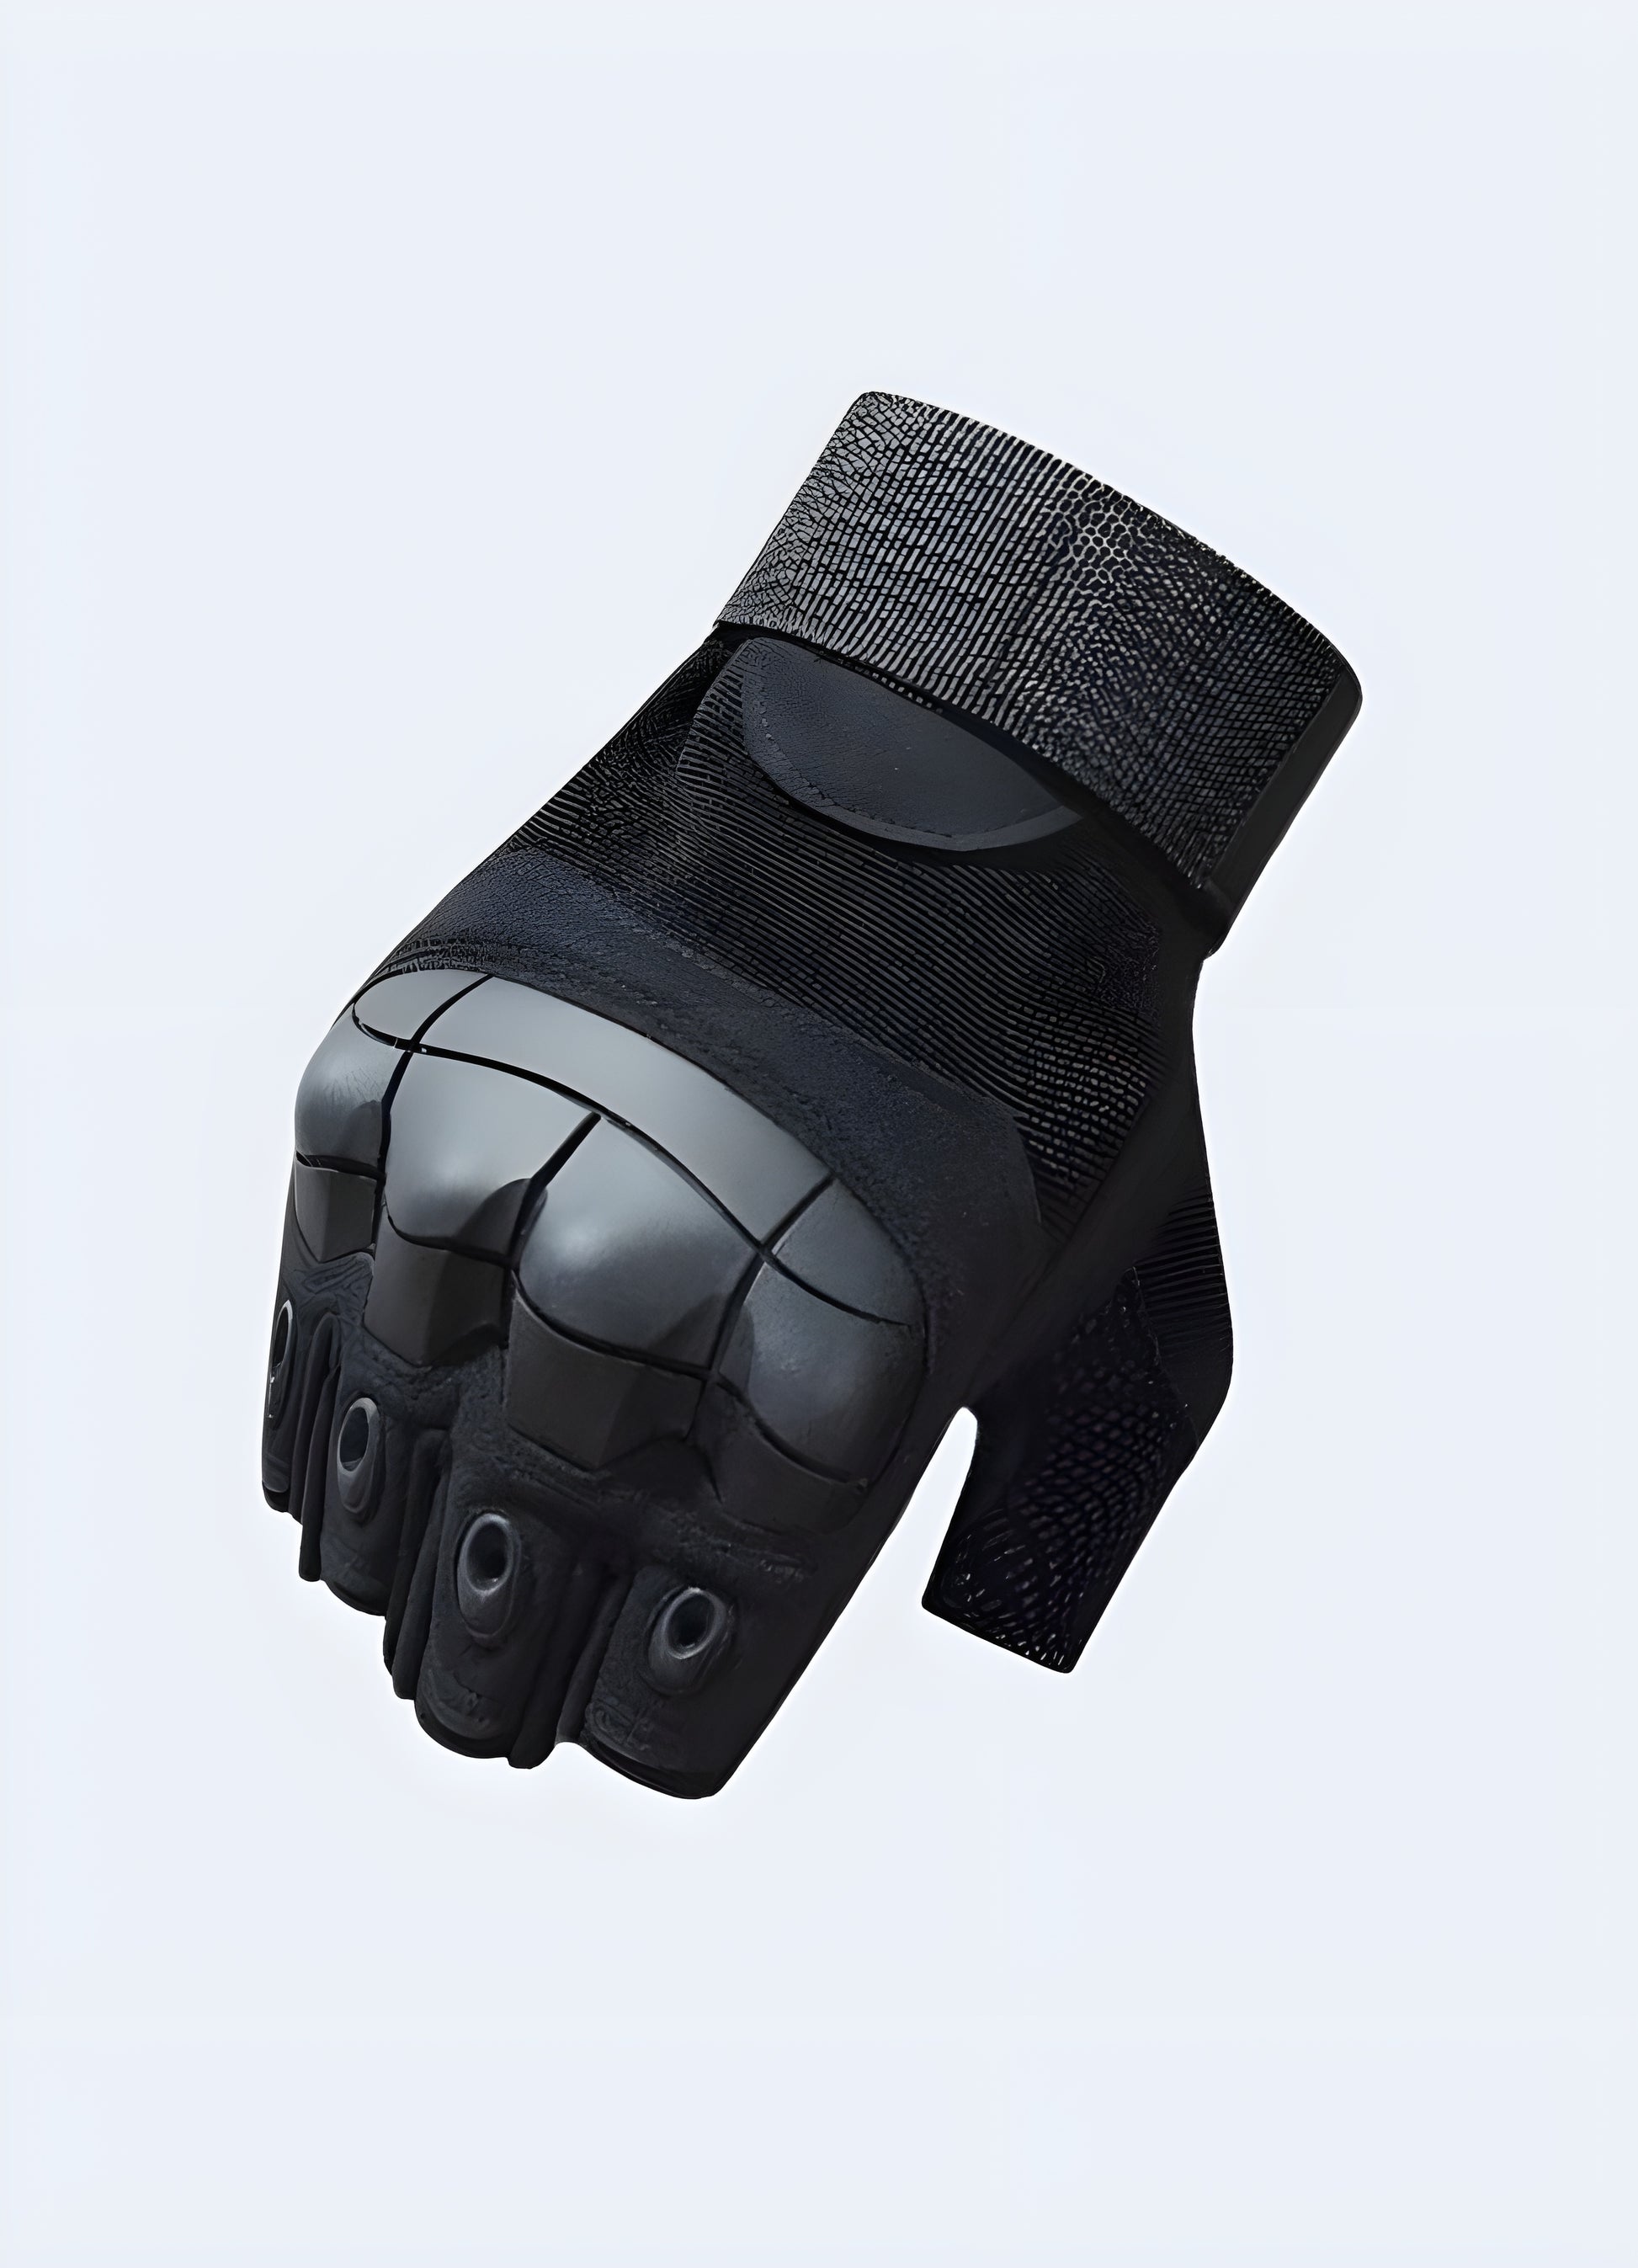 Tactical fingerless gloves black front view of fingerless tactical gloves showcasing reinforced knuckles and padded palm for enhanced protection and grip view.